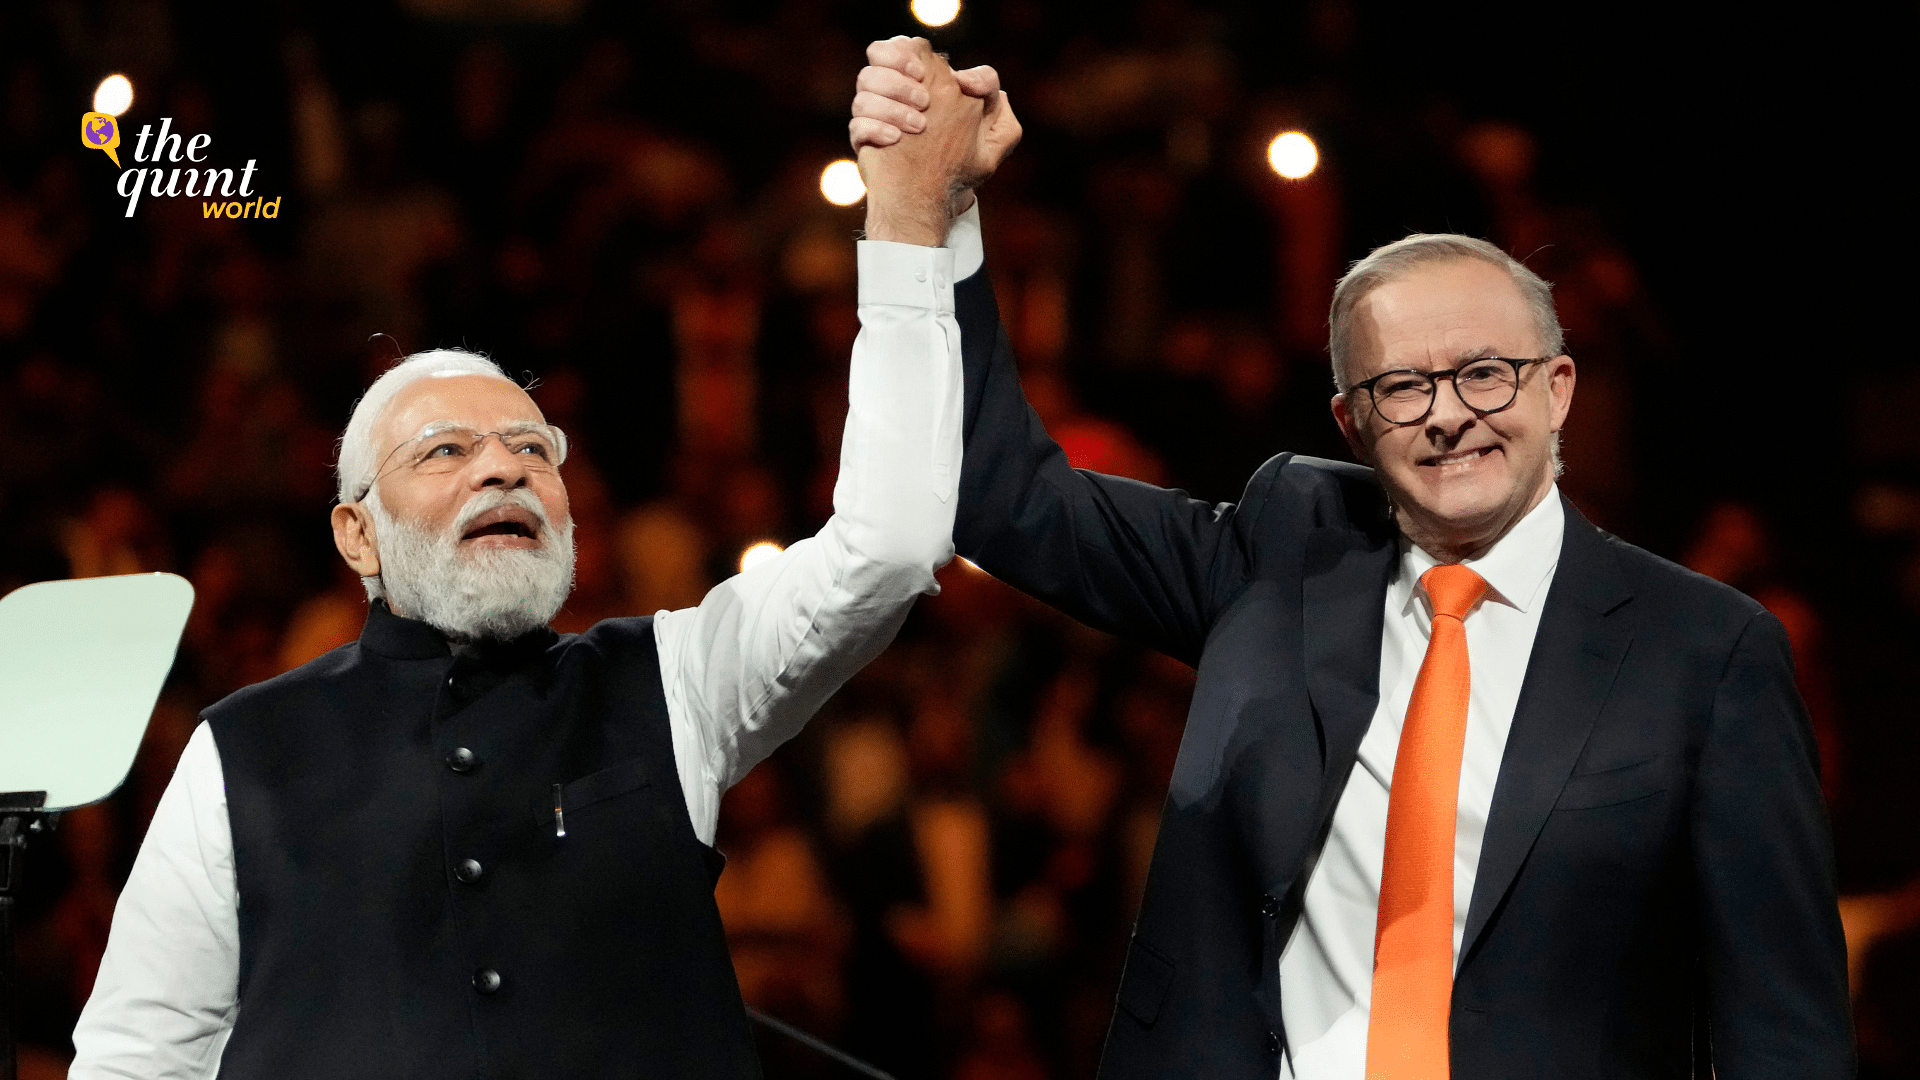 <div class="paragraphs"><p>Australian Prime Minister <a href="https://www.thequint.com/news/world/australia-elections-anthony-albanese-prime-minister-elect-labor-party">Anthony Albanese</a> kicked off his speech at an Indian diaspora community event held in Sydney on Tuesday, 23 May, by saying that “Prime Minister Modi is the boss."</p></div>